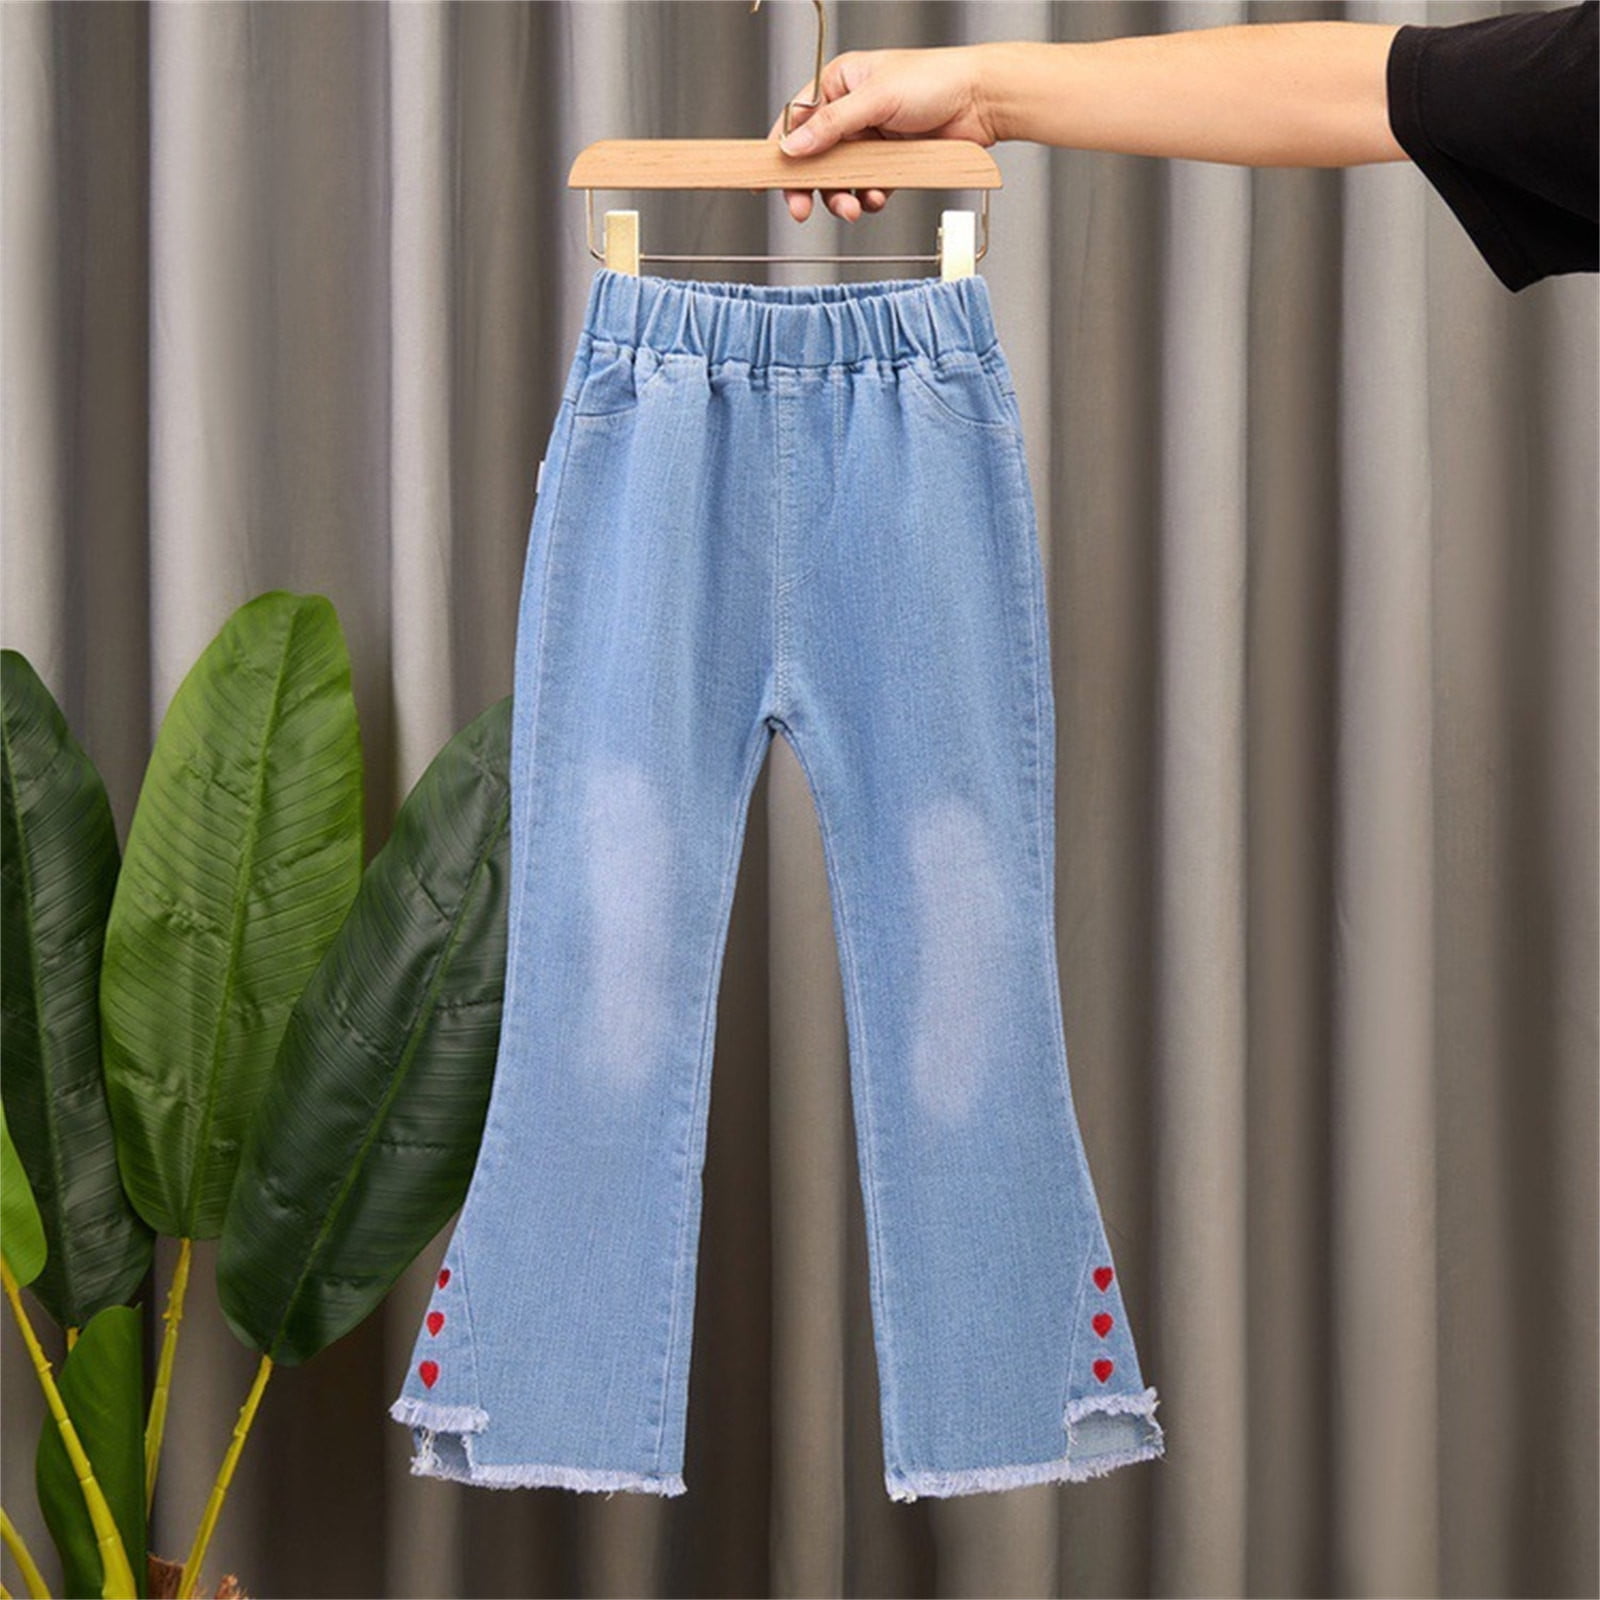 Baby Delas!2-13 Years Girls Girls,Flare Pants,Bootcut Jeans Baggy Jeans Jeans Leg Girls,Toddler Jeans,Girls Flare Girls,Toddler for Jeans Flared Wide Bootcut Jeans,Girls Flare